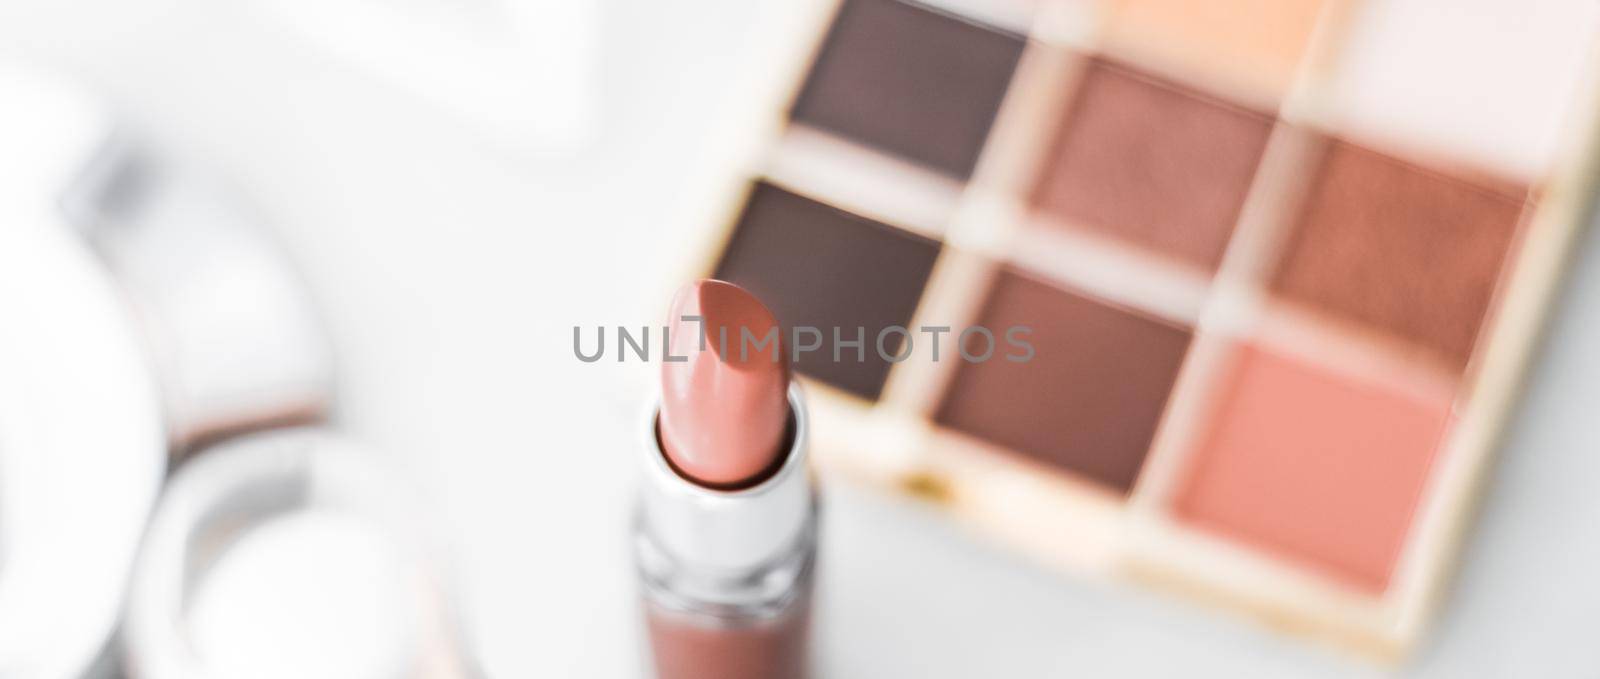 Cosmetics, makeup products on dressing vanity table, lipstick, foundation base, nailpolish and eyeshadows for luxury beauty and fashion brand ads design by Anneleven